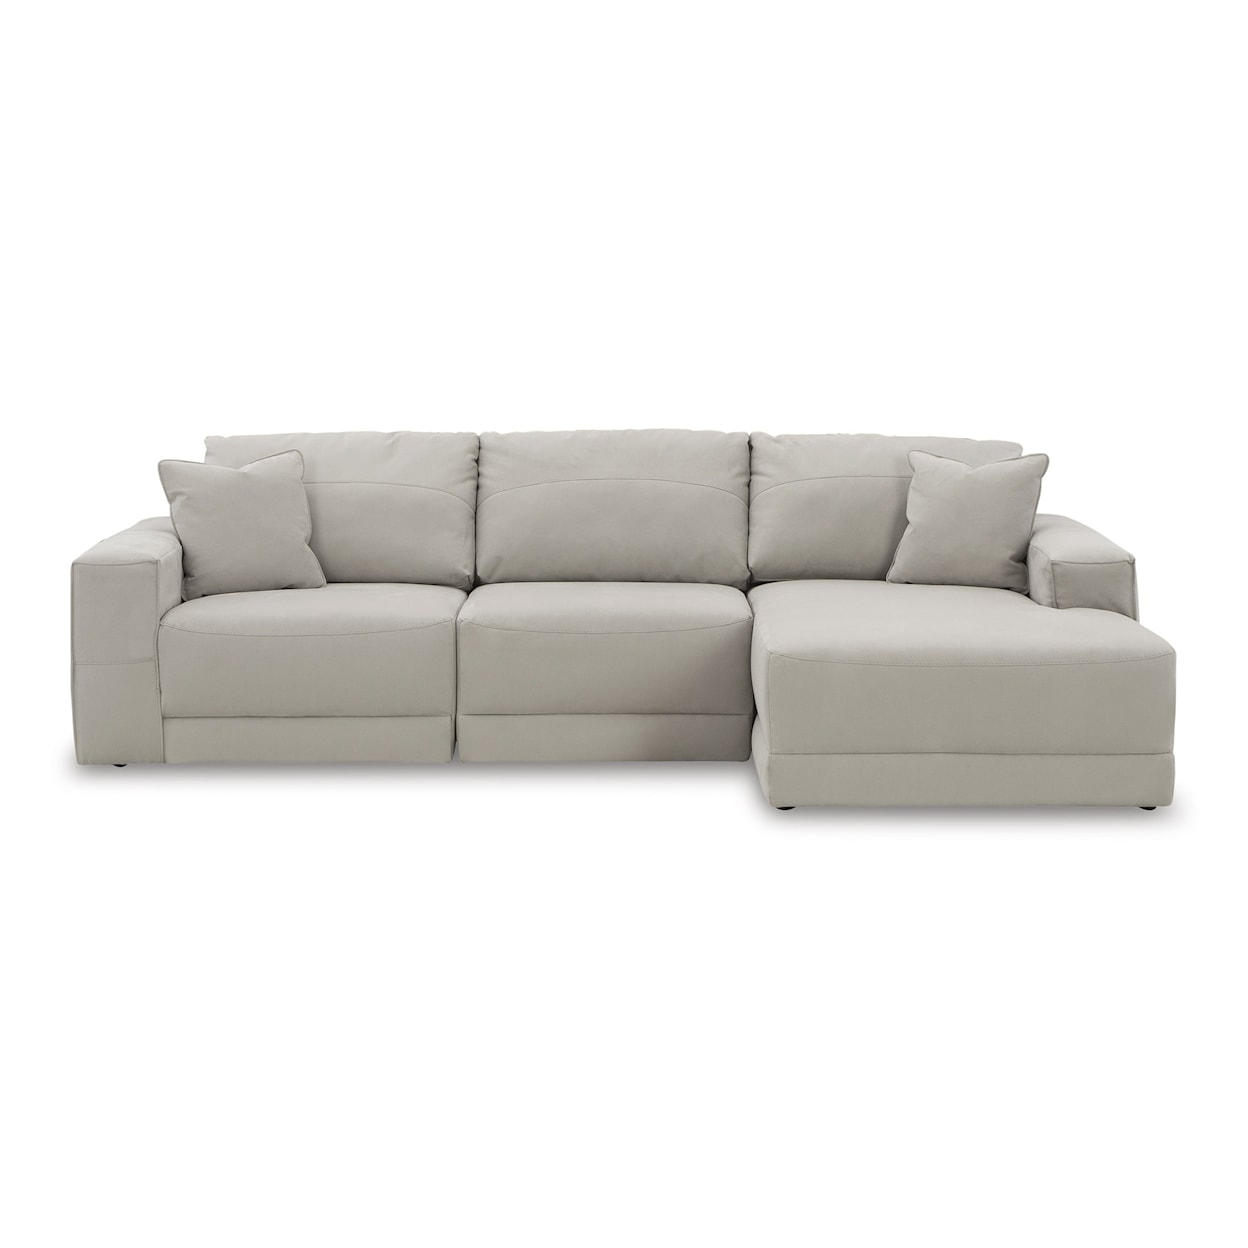 Benchcraft Next-Gen Gaucho 3-Piece Sectional Sofa with Chaise